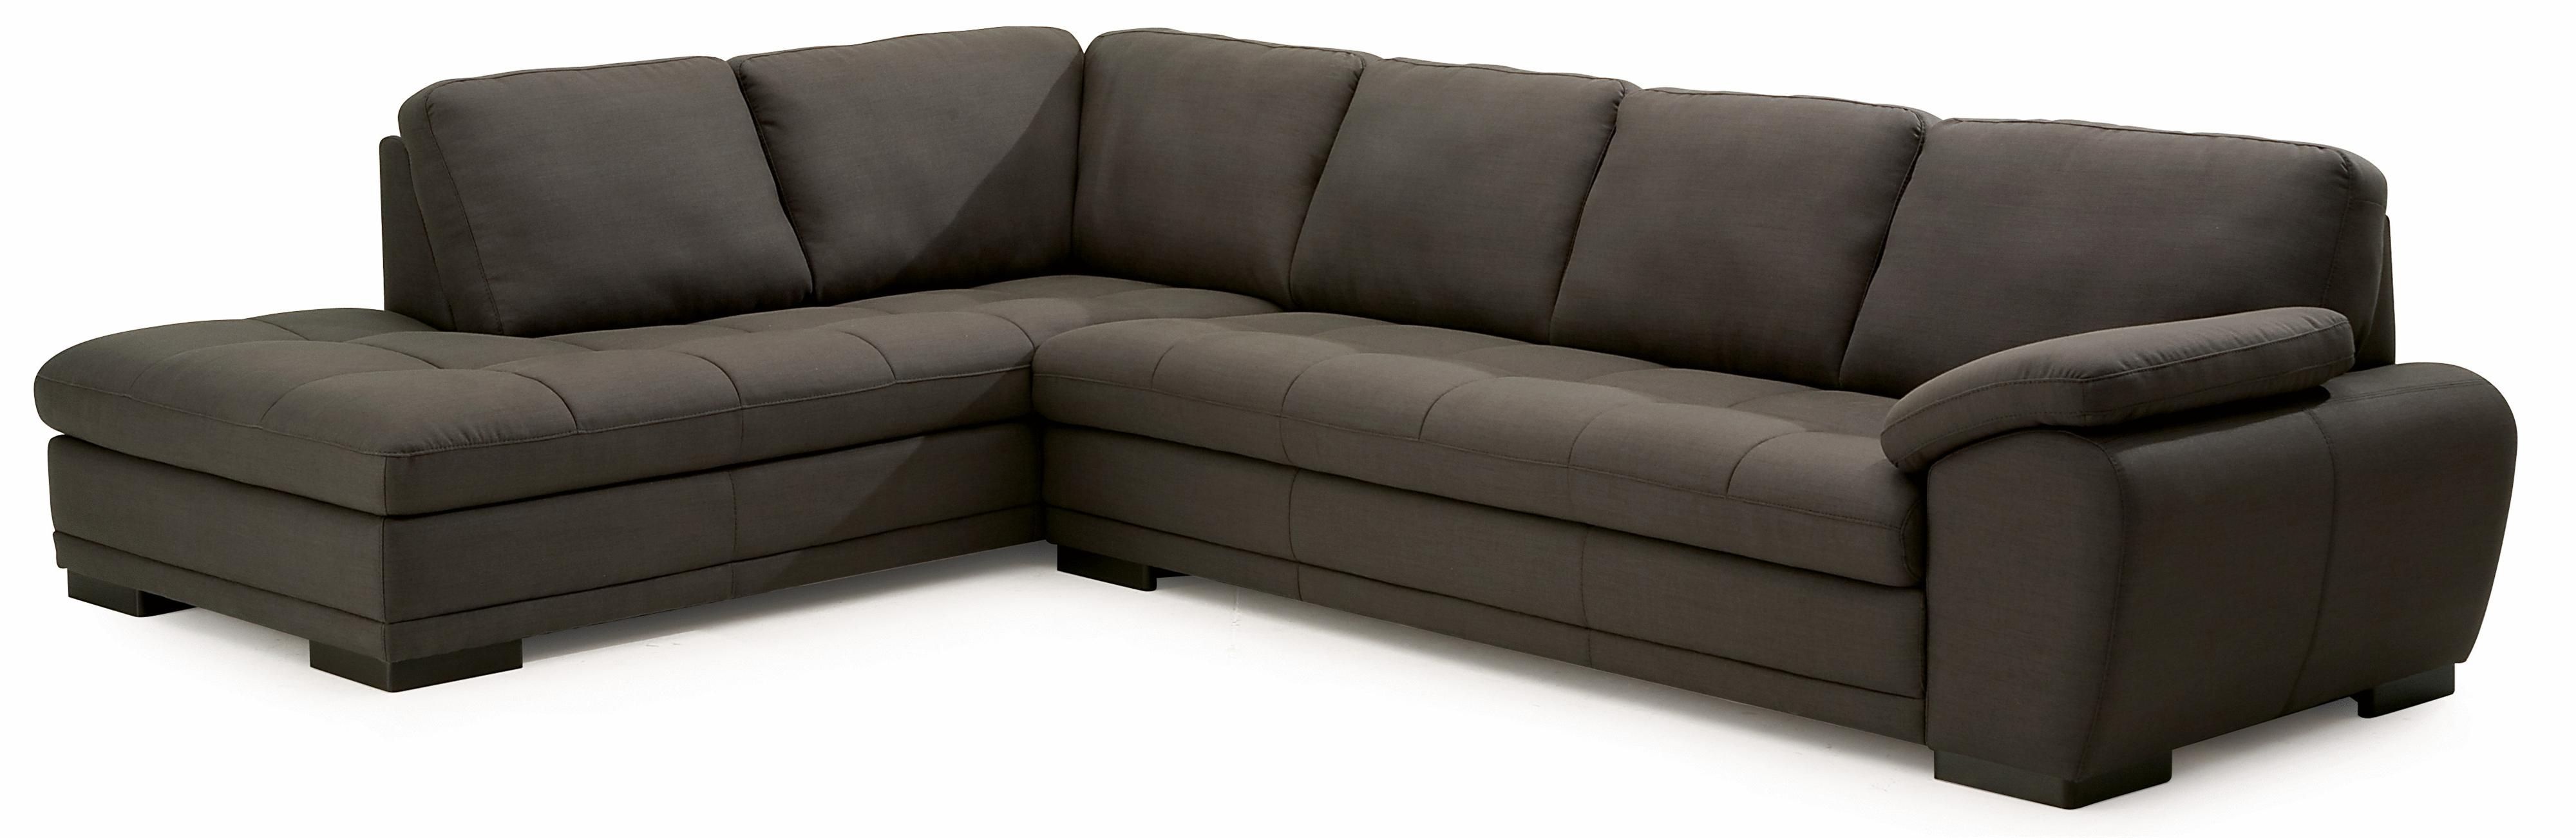 Miami Sectional Sofas Within Current Palliser Miami Contemporary 2 Piece Sectional Sofa With Right (View 1 of 15)